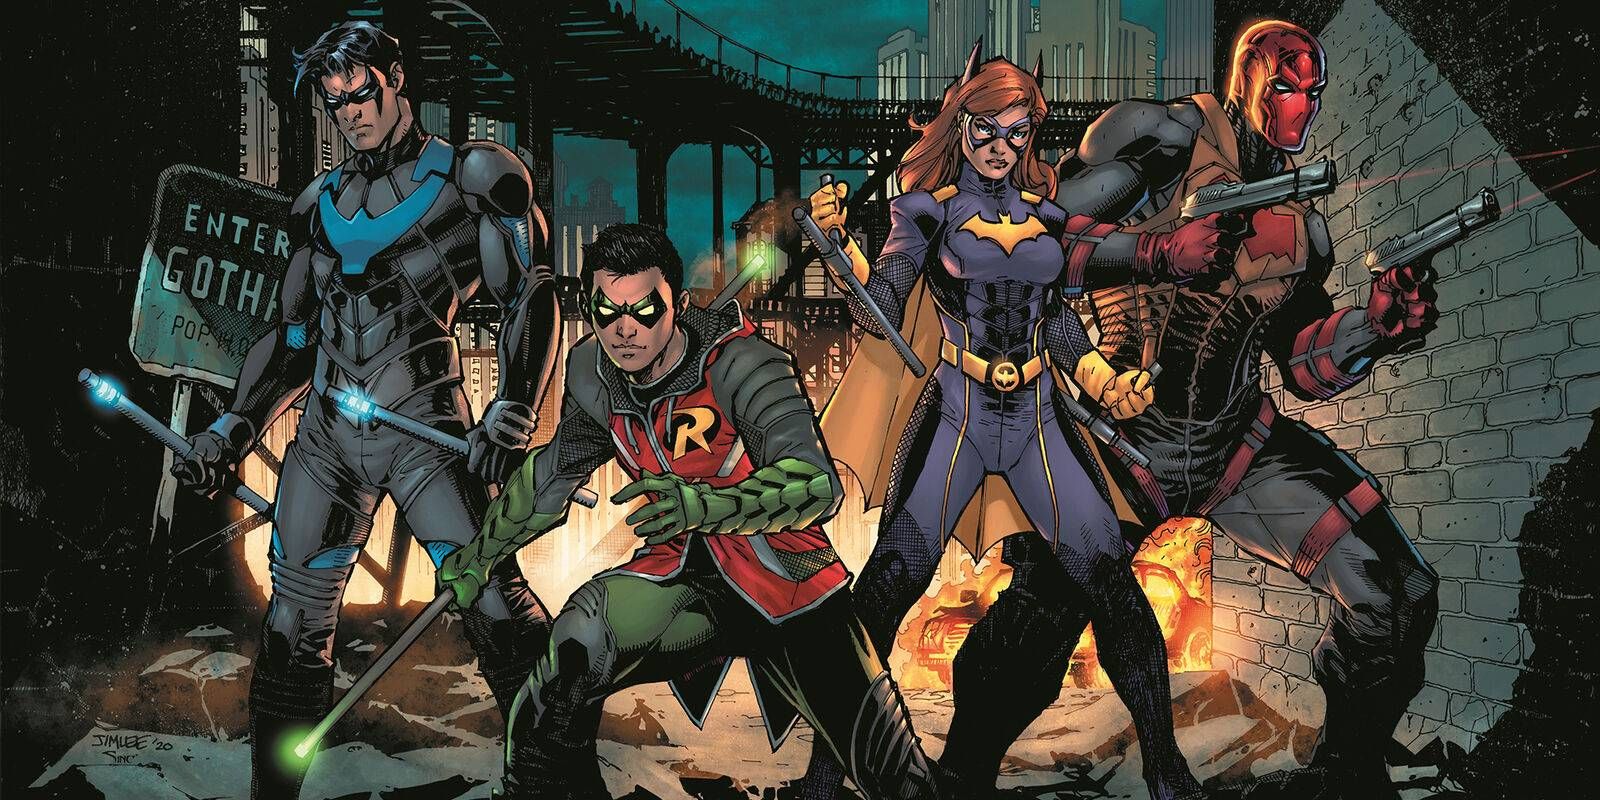 Gotham Knights DLC Gilded City Comic Screenshot Featuring Red Hood, Batgirl, Tim Drake Robin, and Nightwing Getting Ready to Fight Crime